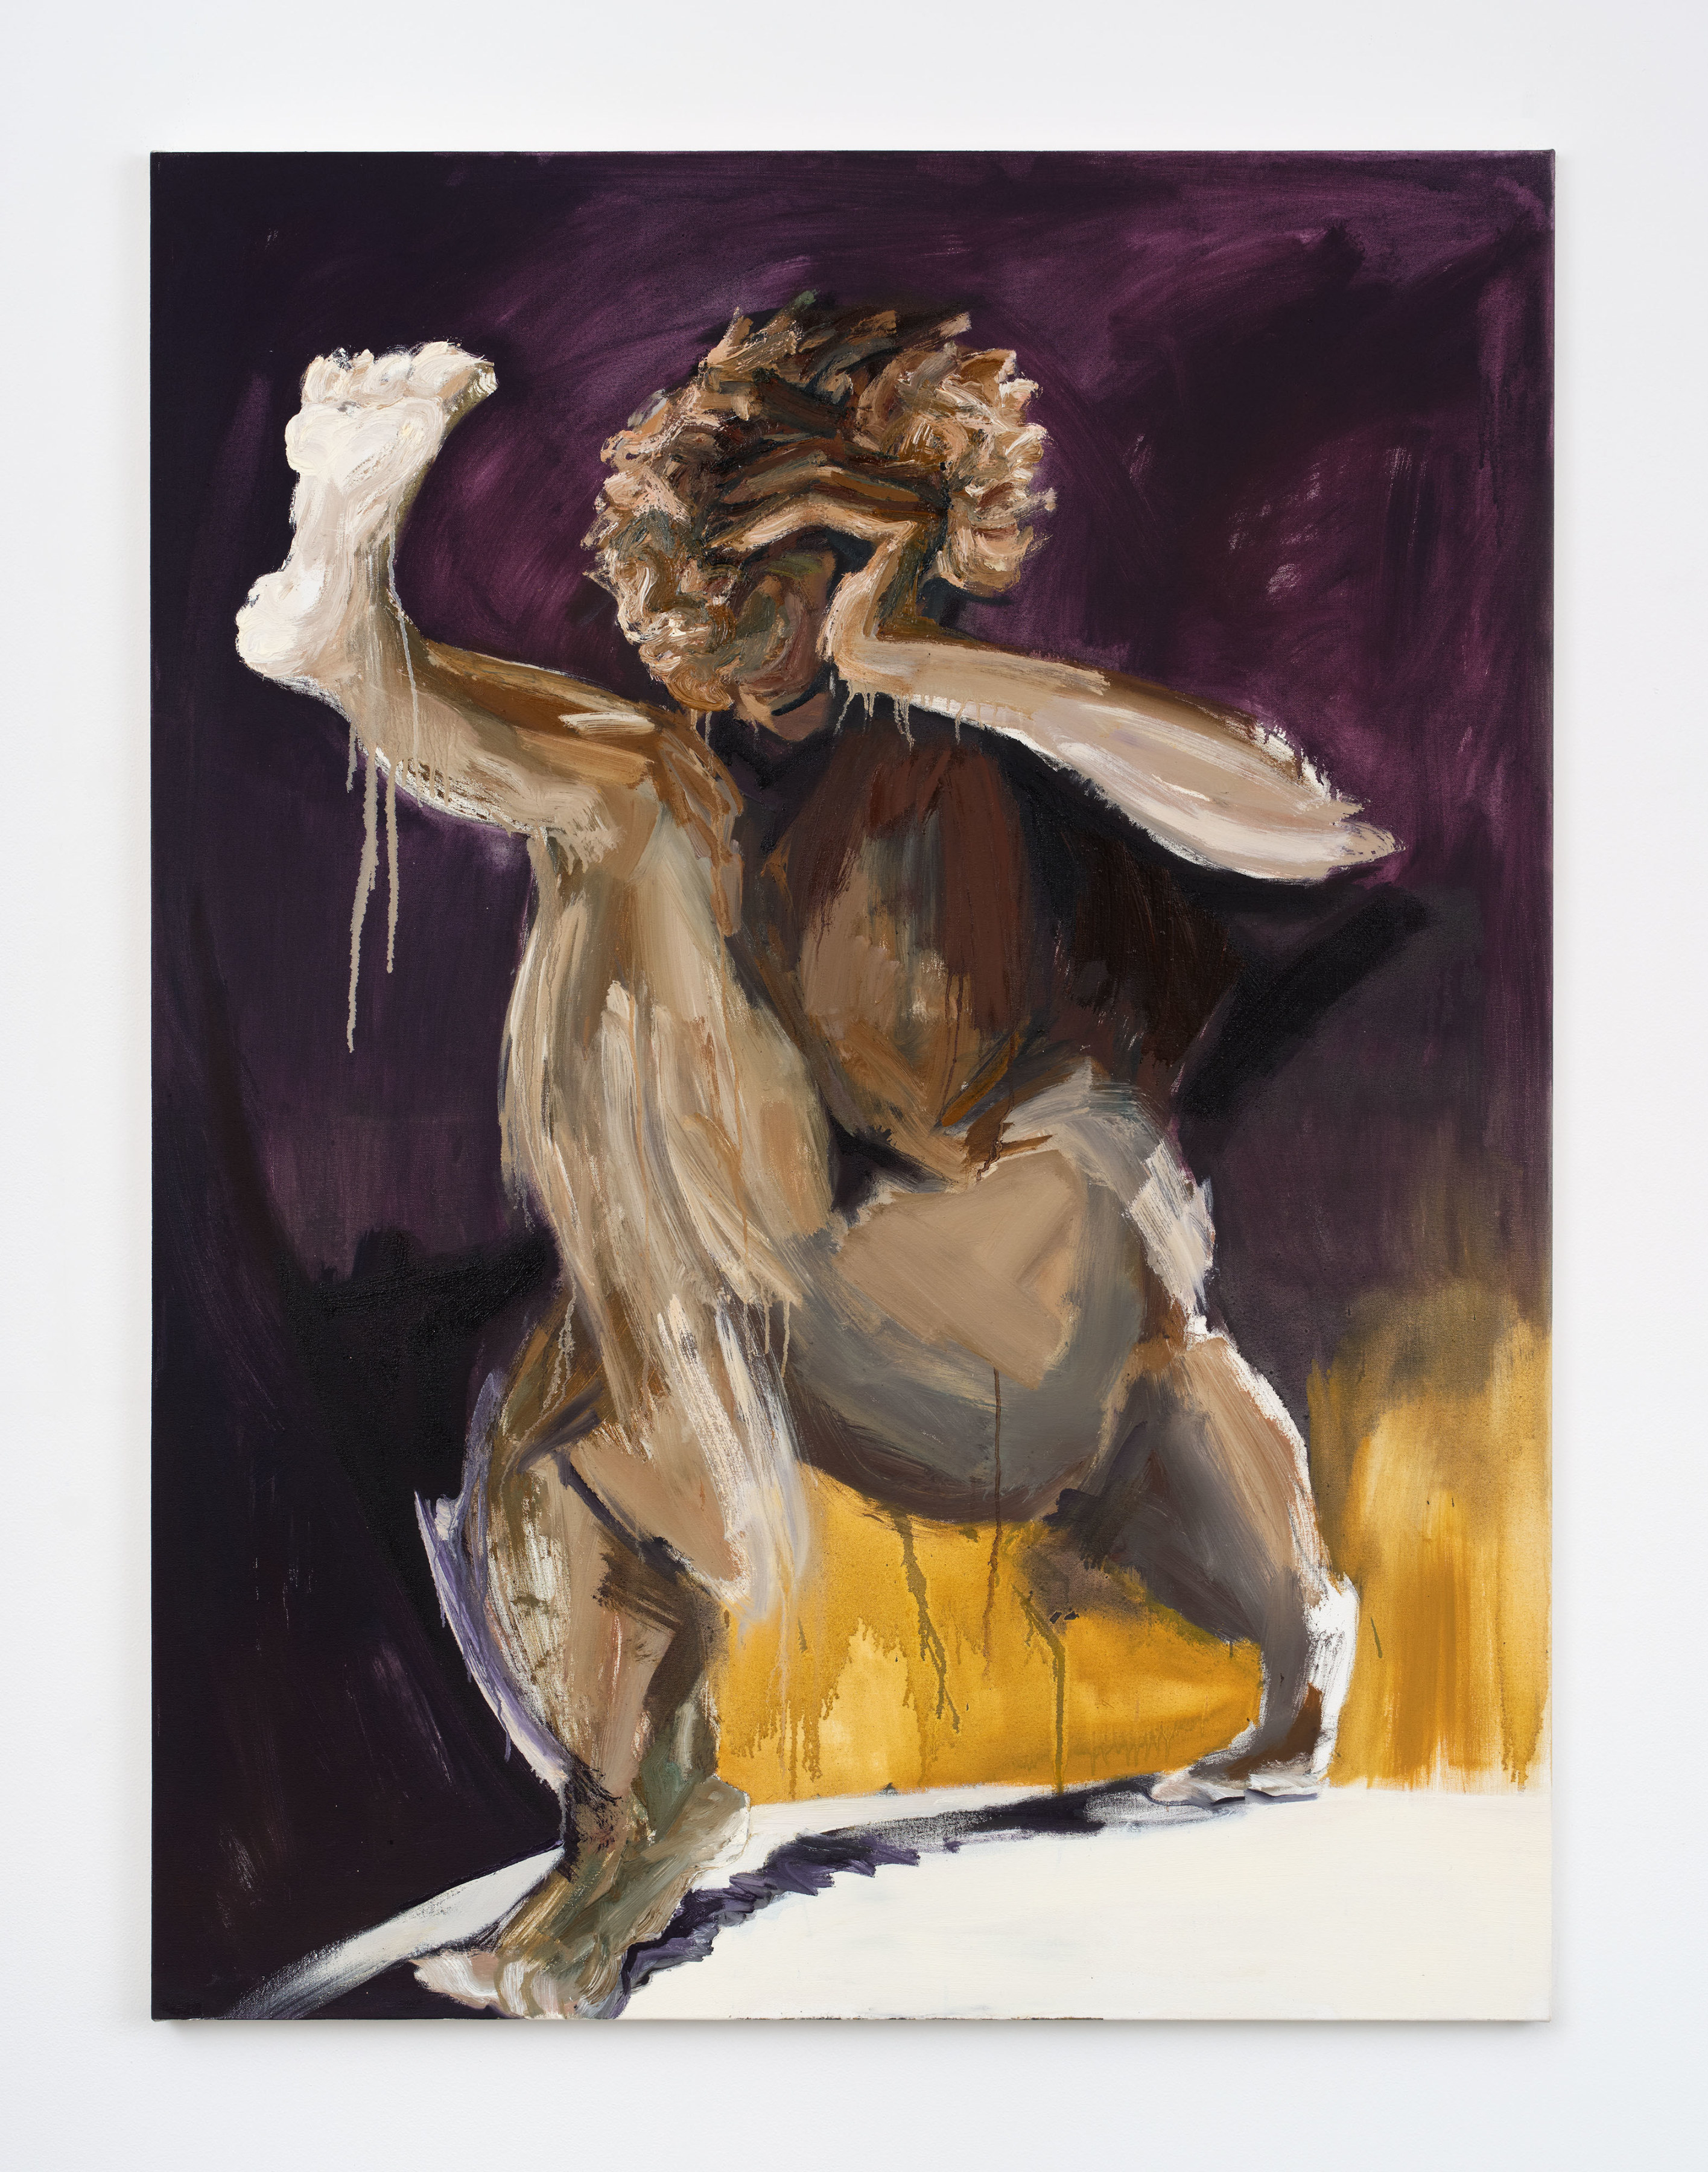 A nude figure kicking in the air against a purple and yellow background.